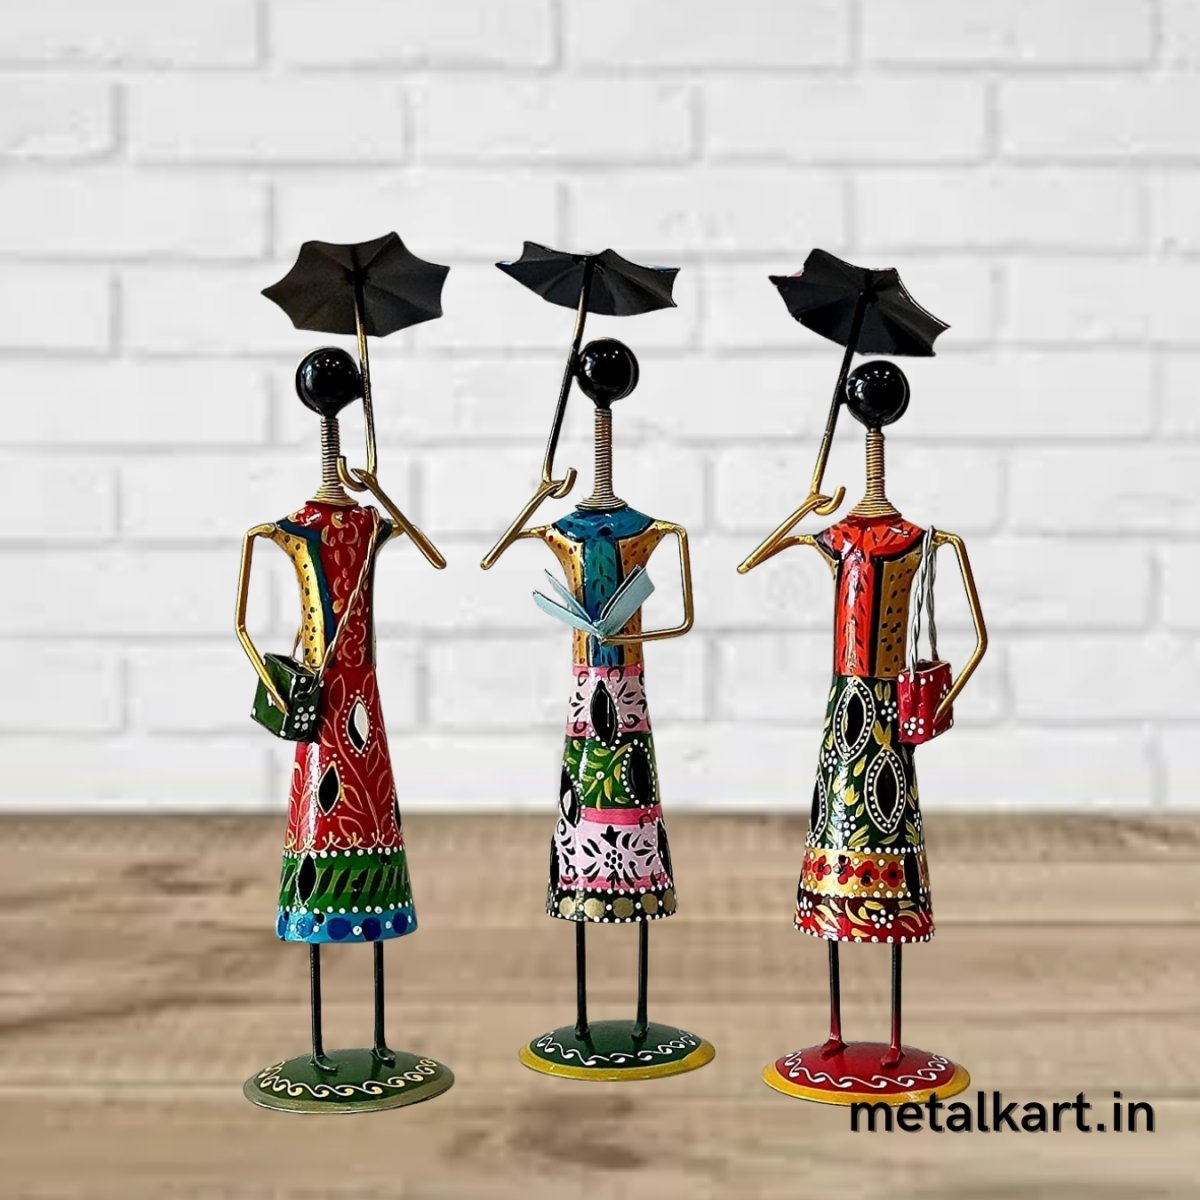 Metallic Multicolored 3 ladies with leaf-shaped Umbrella Table décor (11*3*3 Inches)